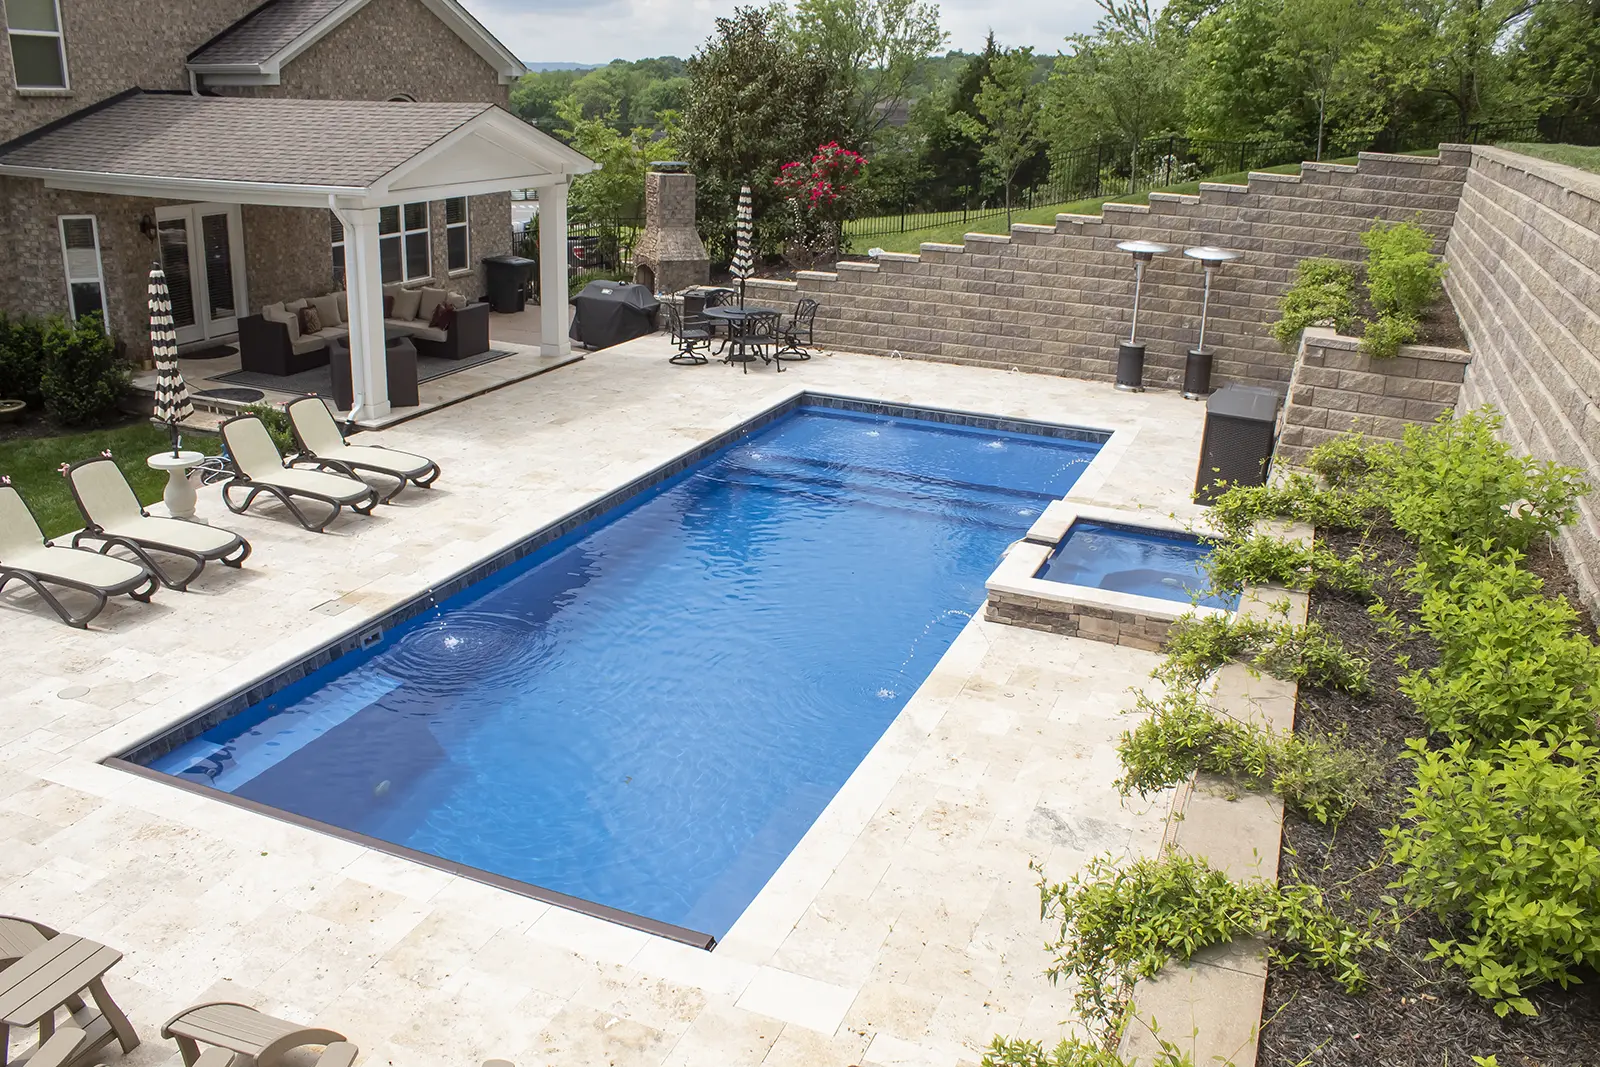 The Leisure Pools Pinnacle™ - from our fiberglass pool gallery